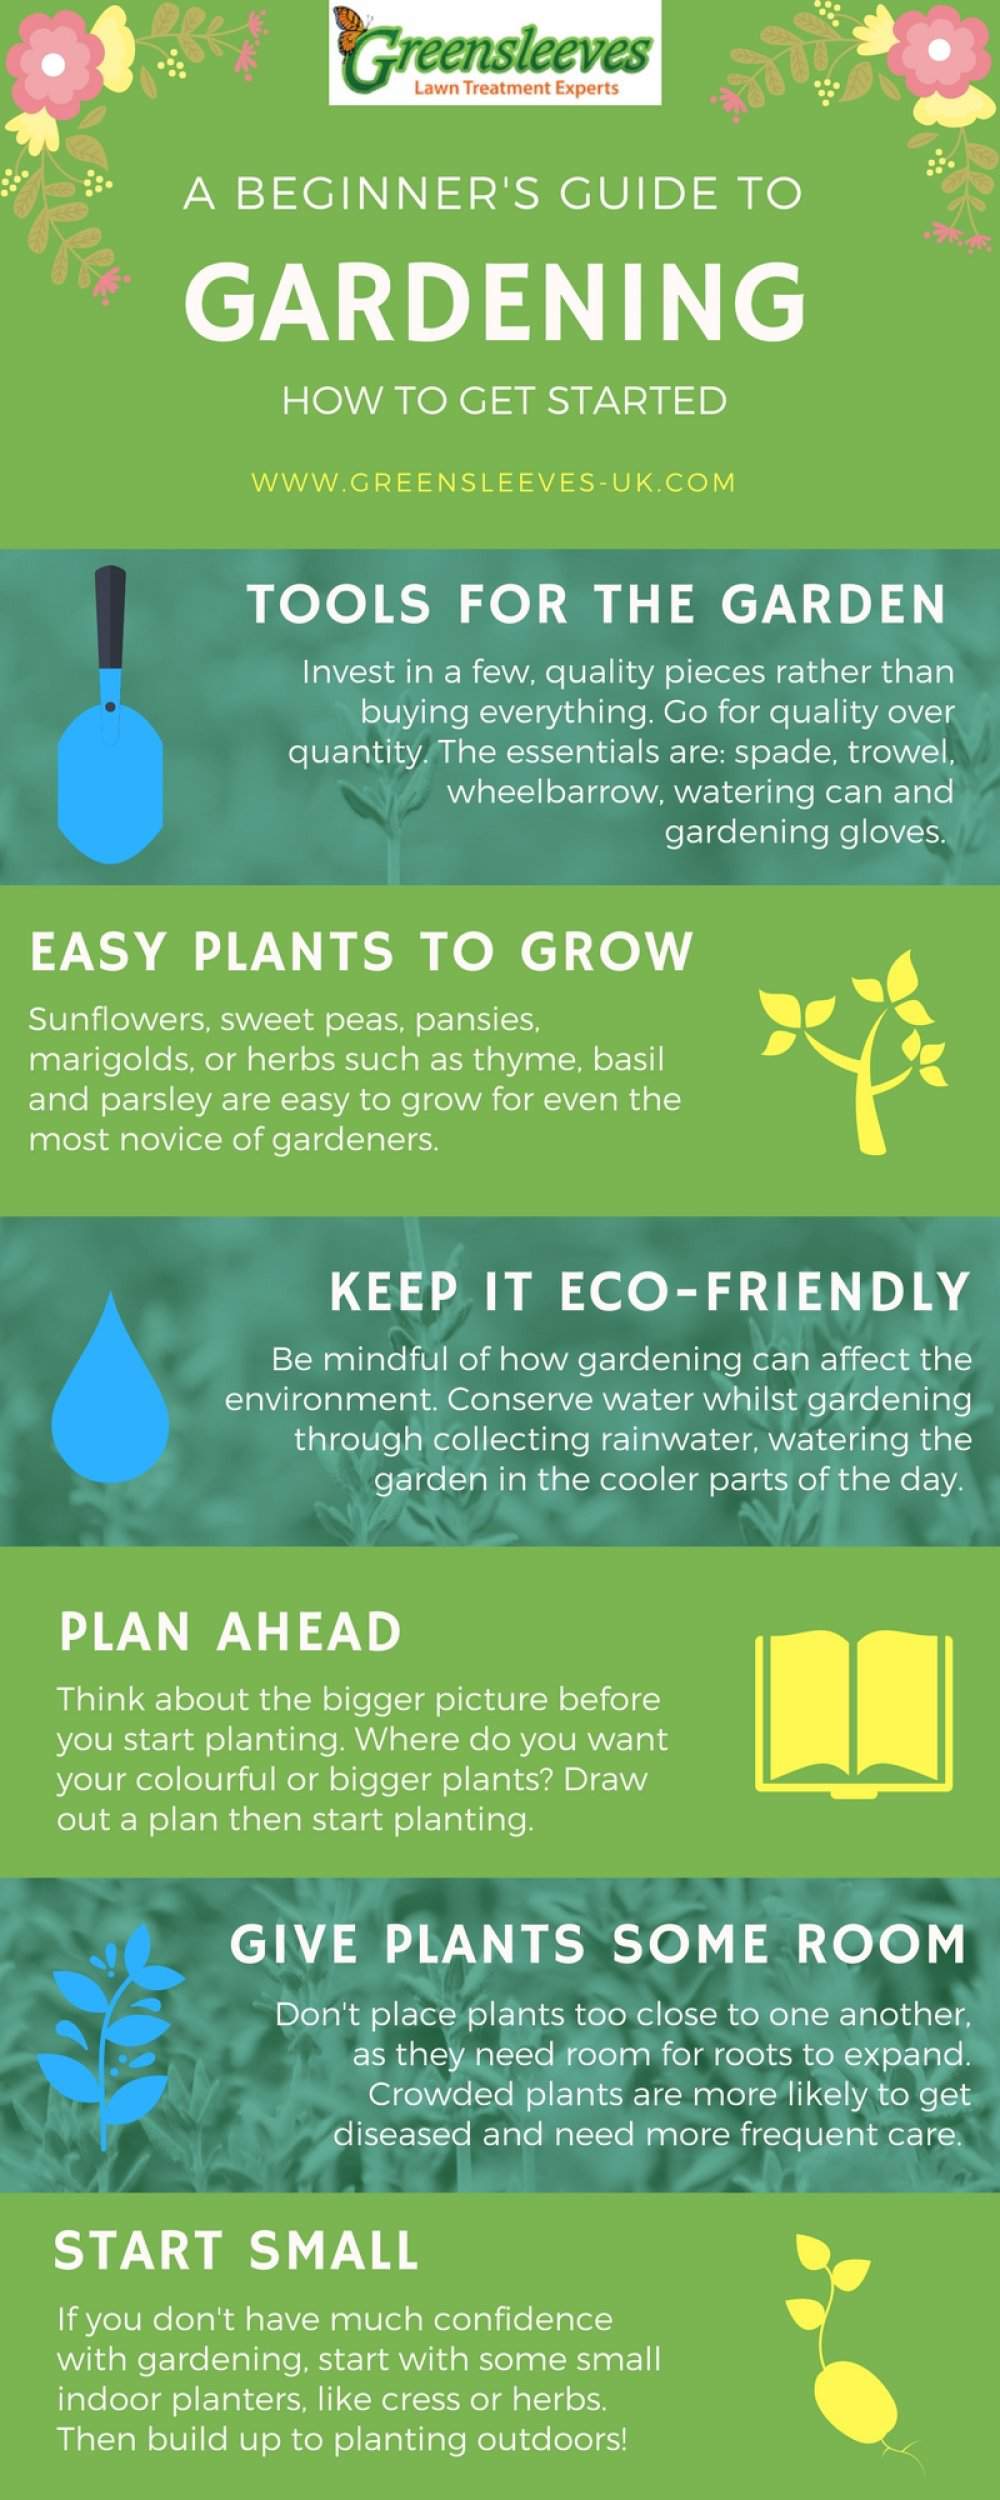 A Beginner's Guide to Gardening